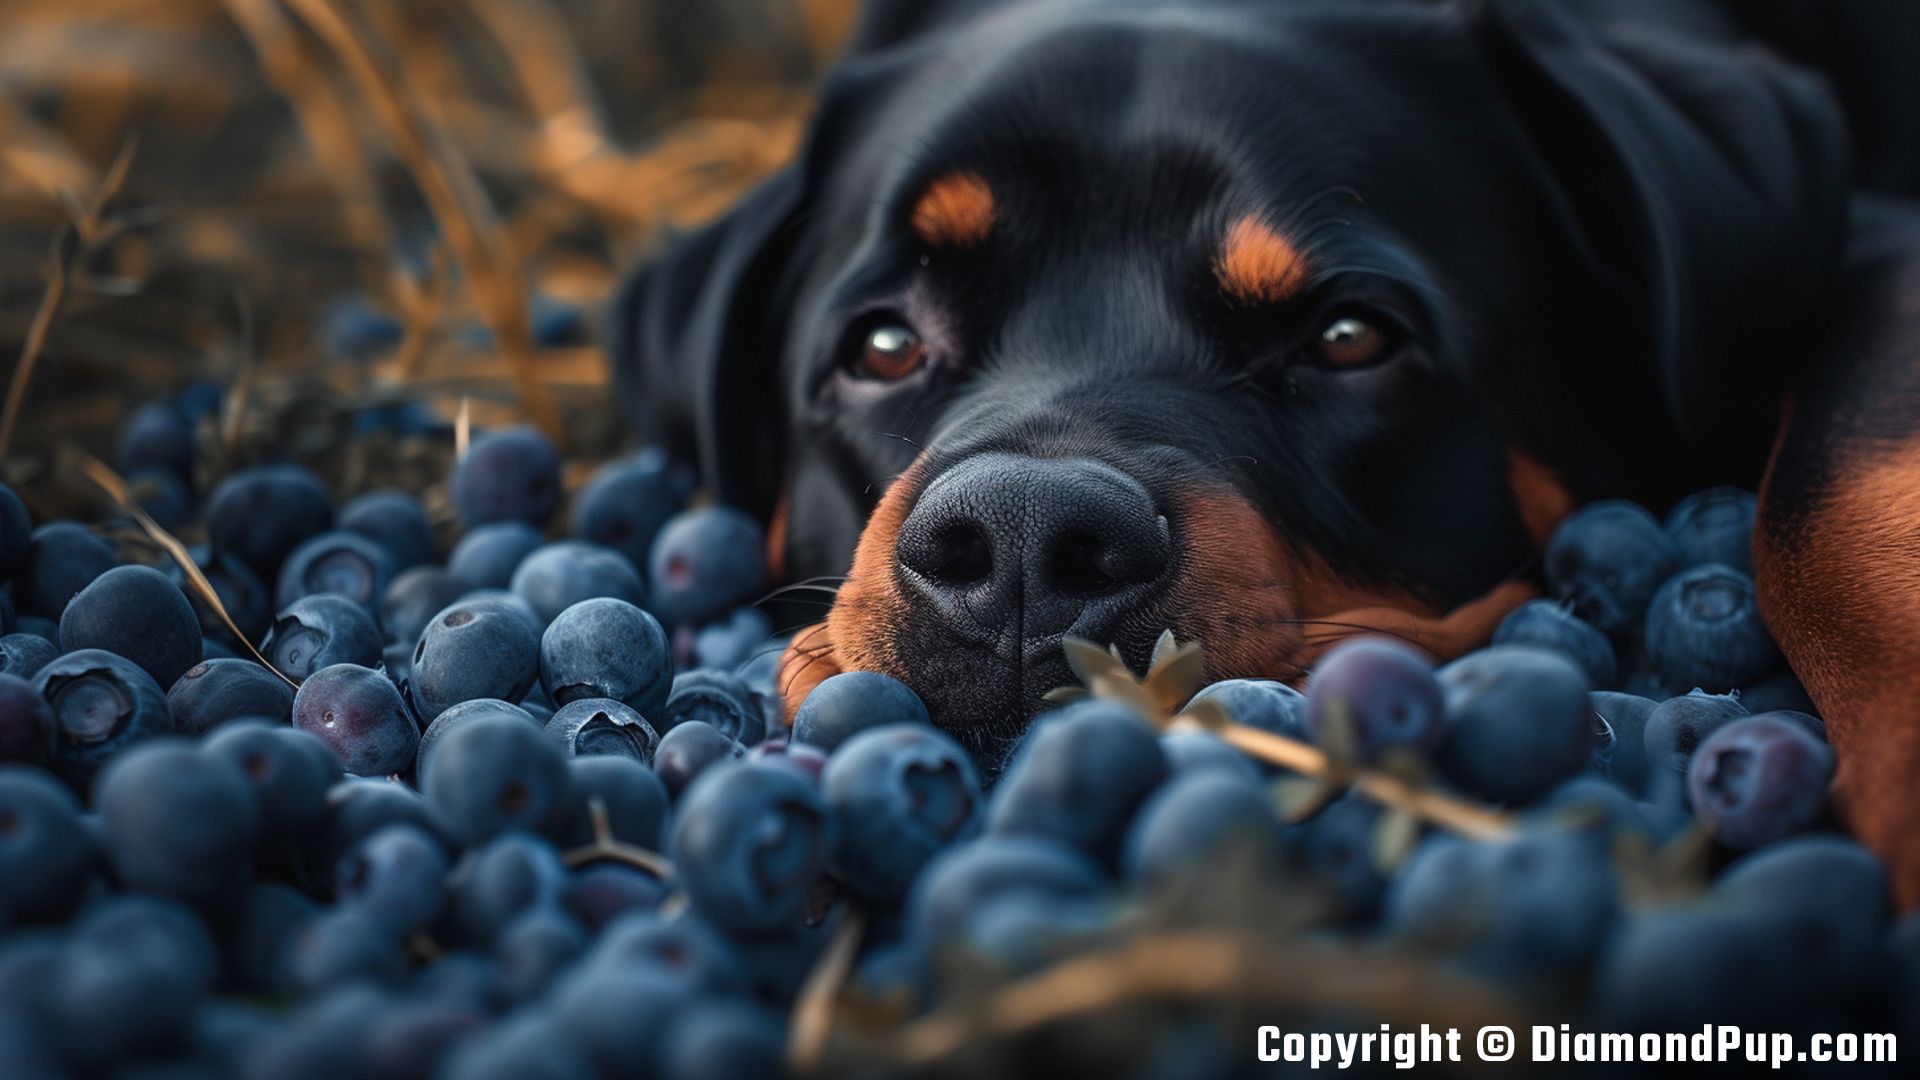 Photograph of an Adorable Rottweiler Eating Blueberries